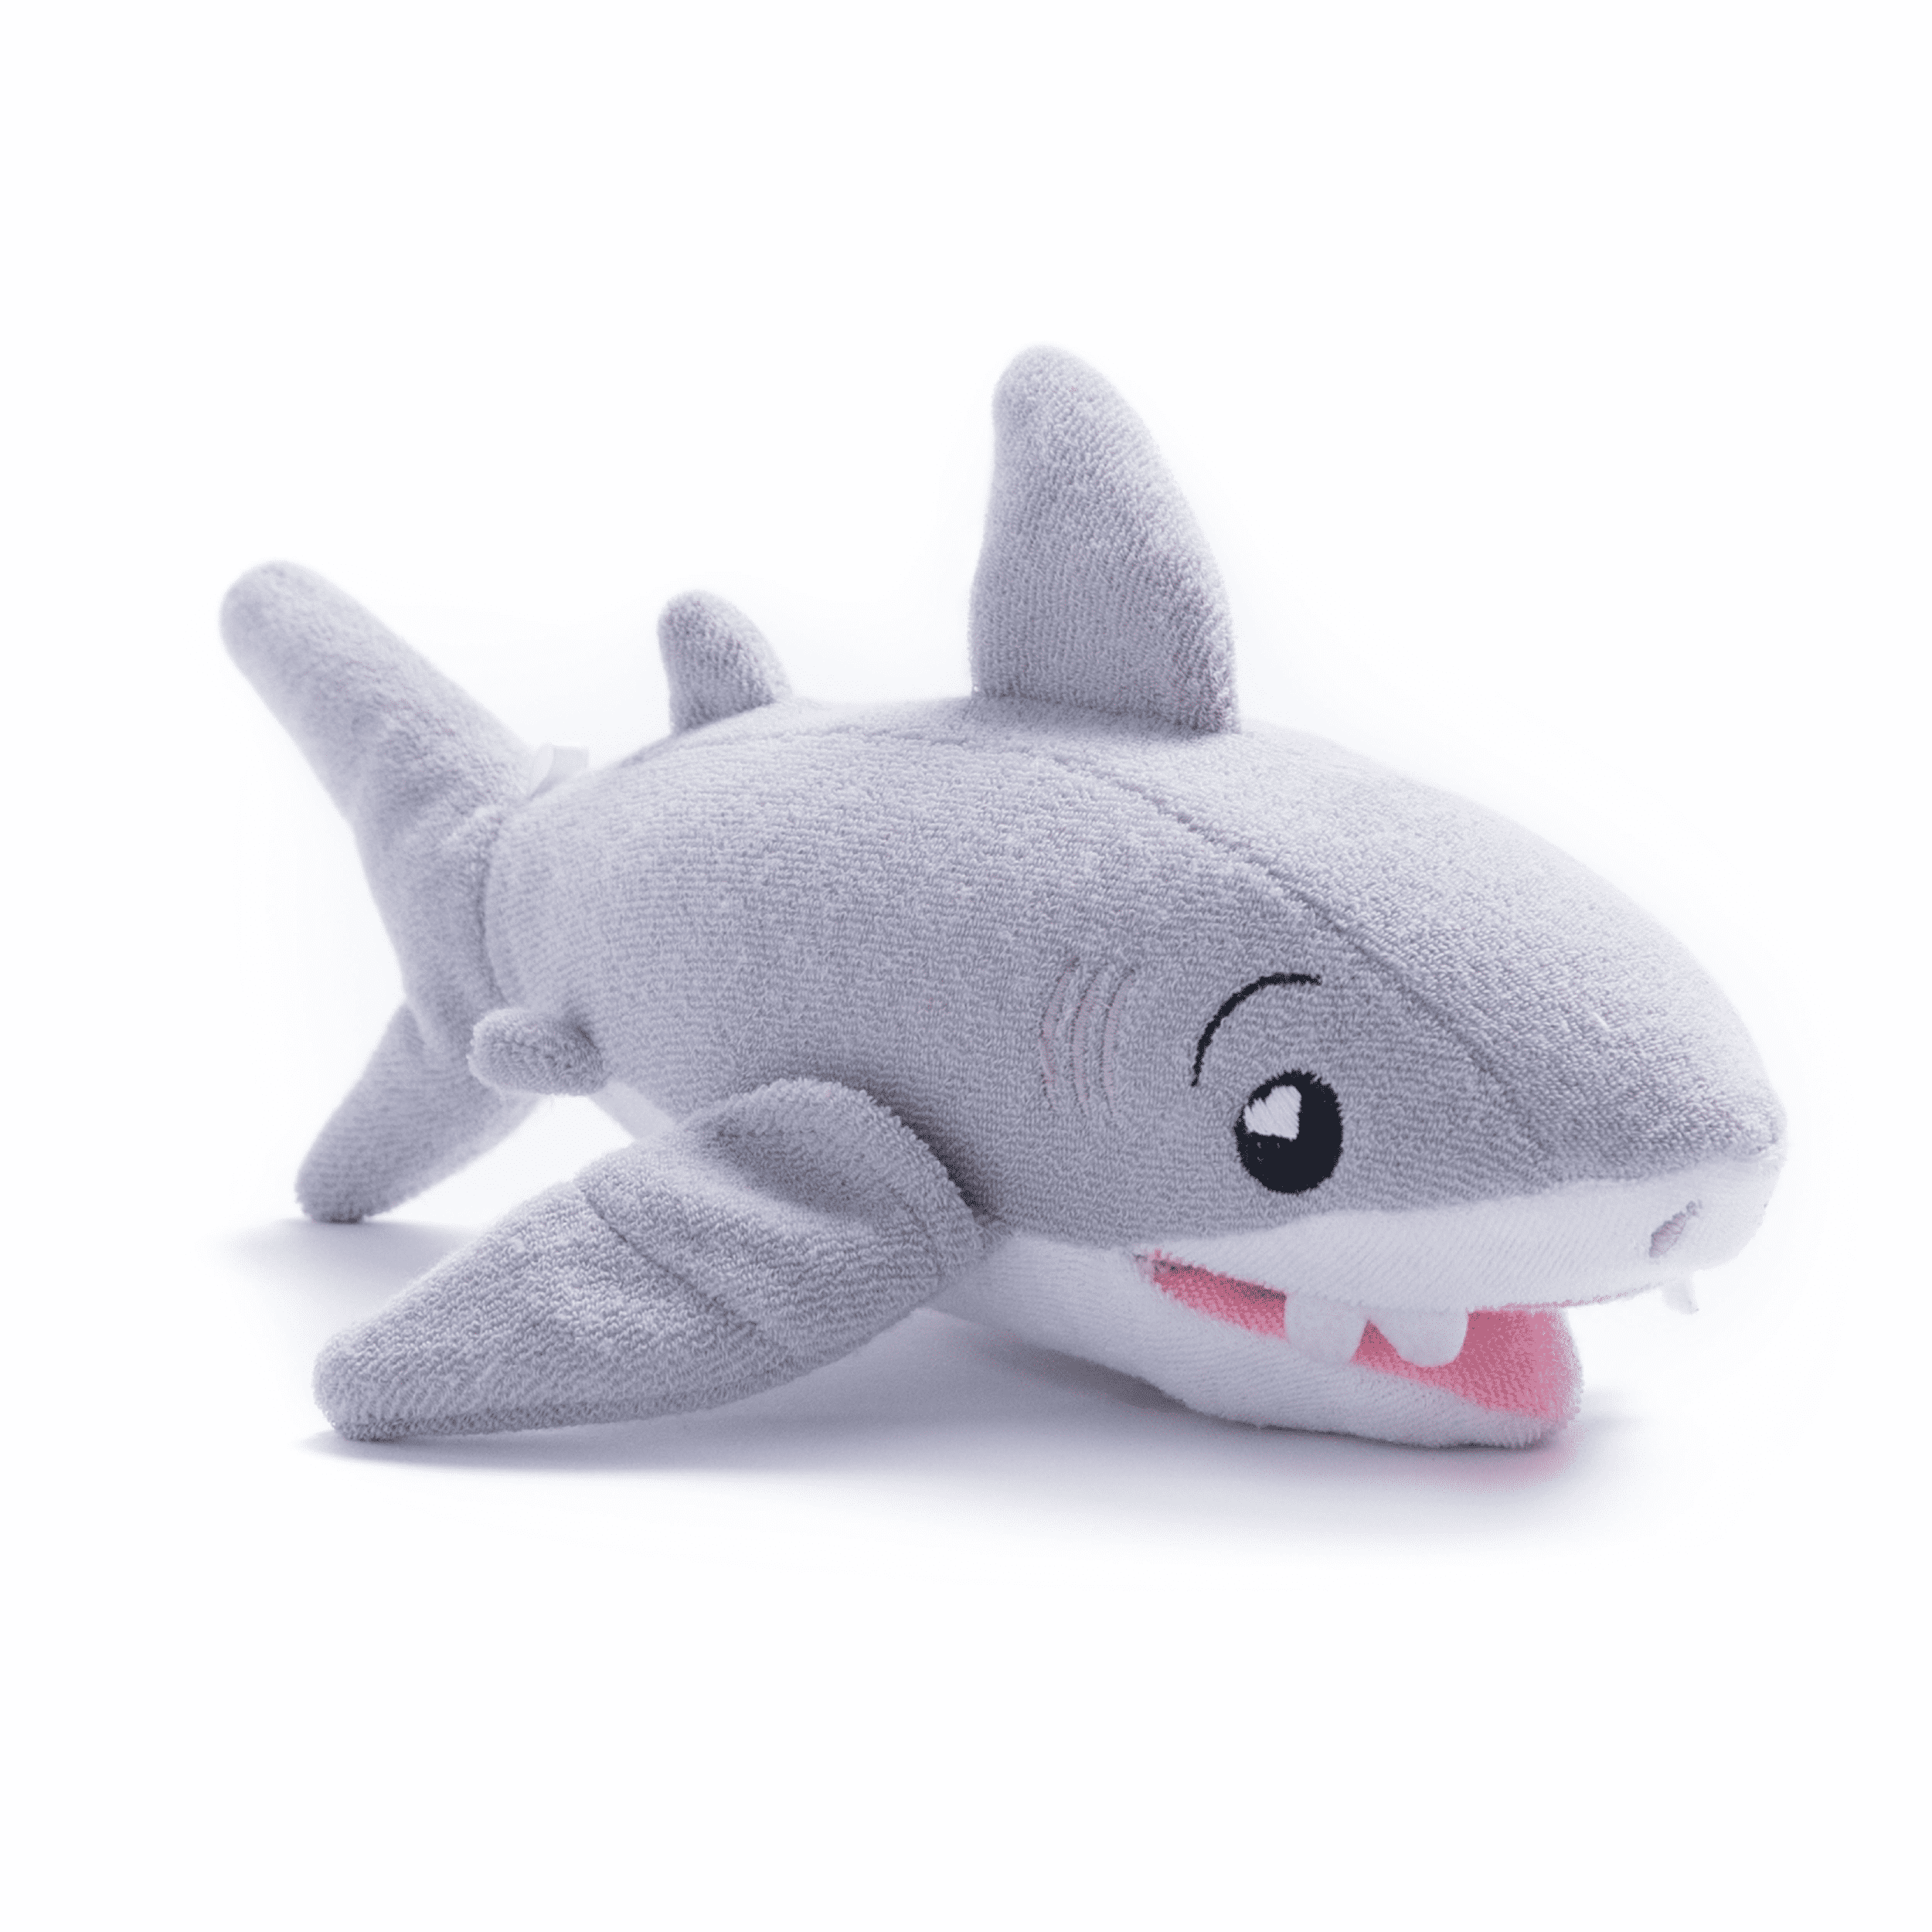 Exfoliating Soft Animal Toy Wash Cloth Sponge Kids and Children Baby Shark Baby Fun Bath Loofah Characters with Soap Pocket Insert for Babies SoapSox Kids Exfoliant Bath Scrub 